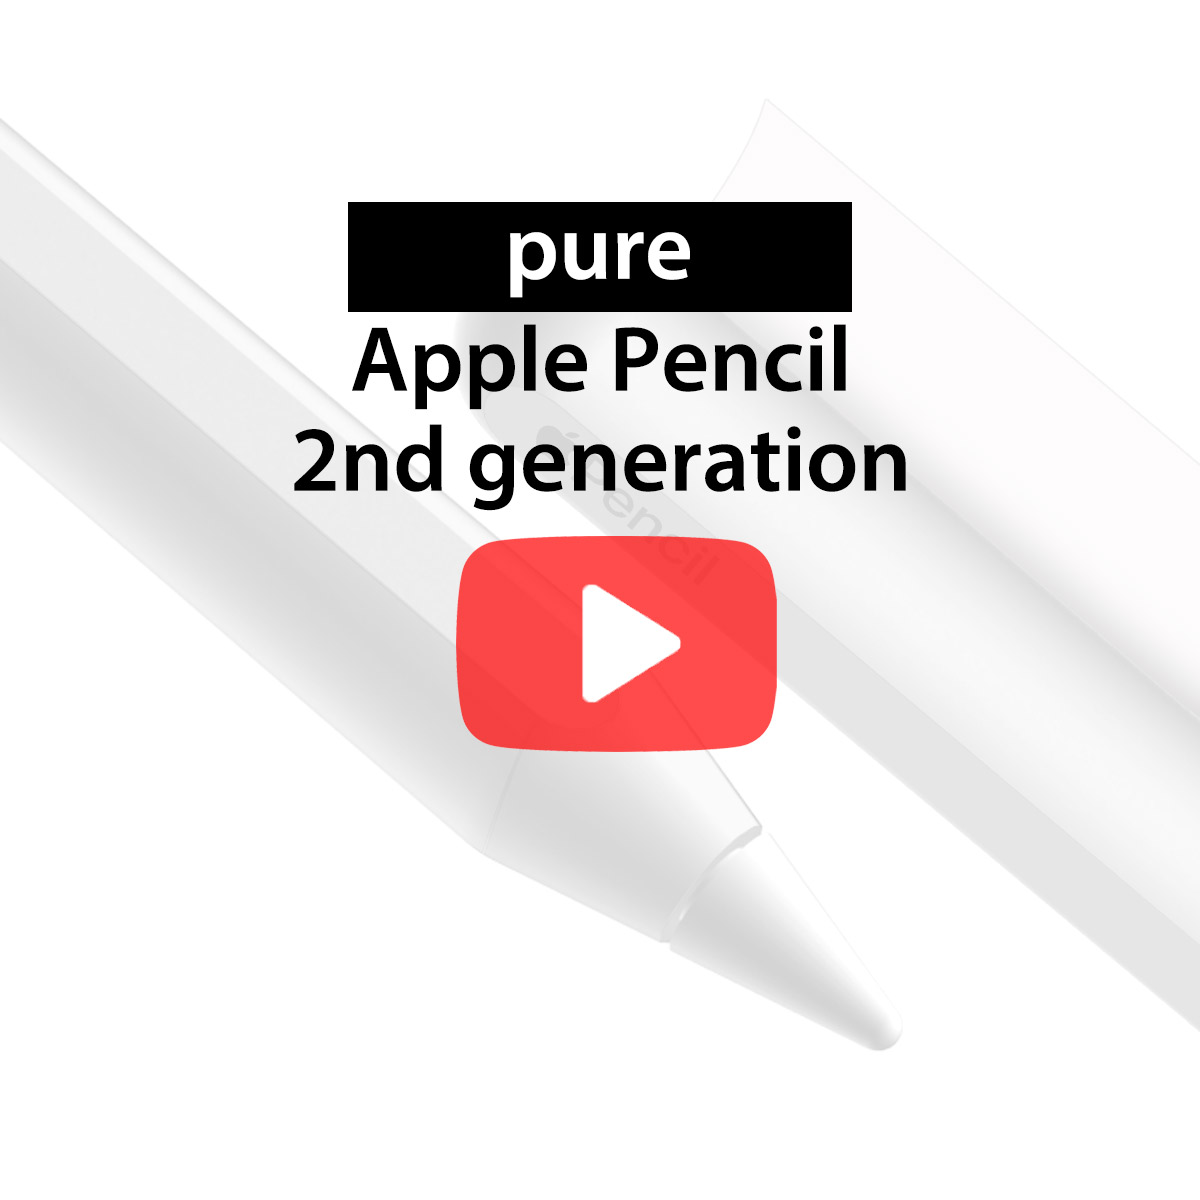 [Apple Pencil 2nd generation] pure